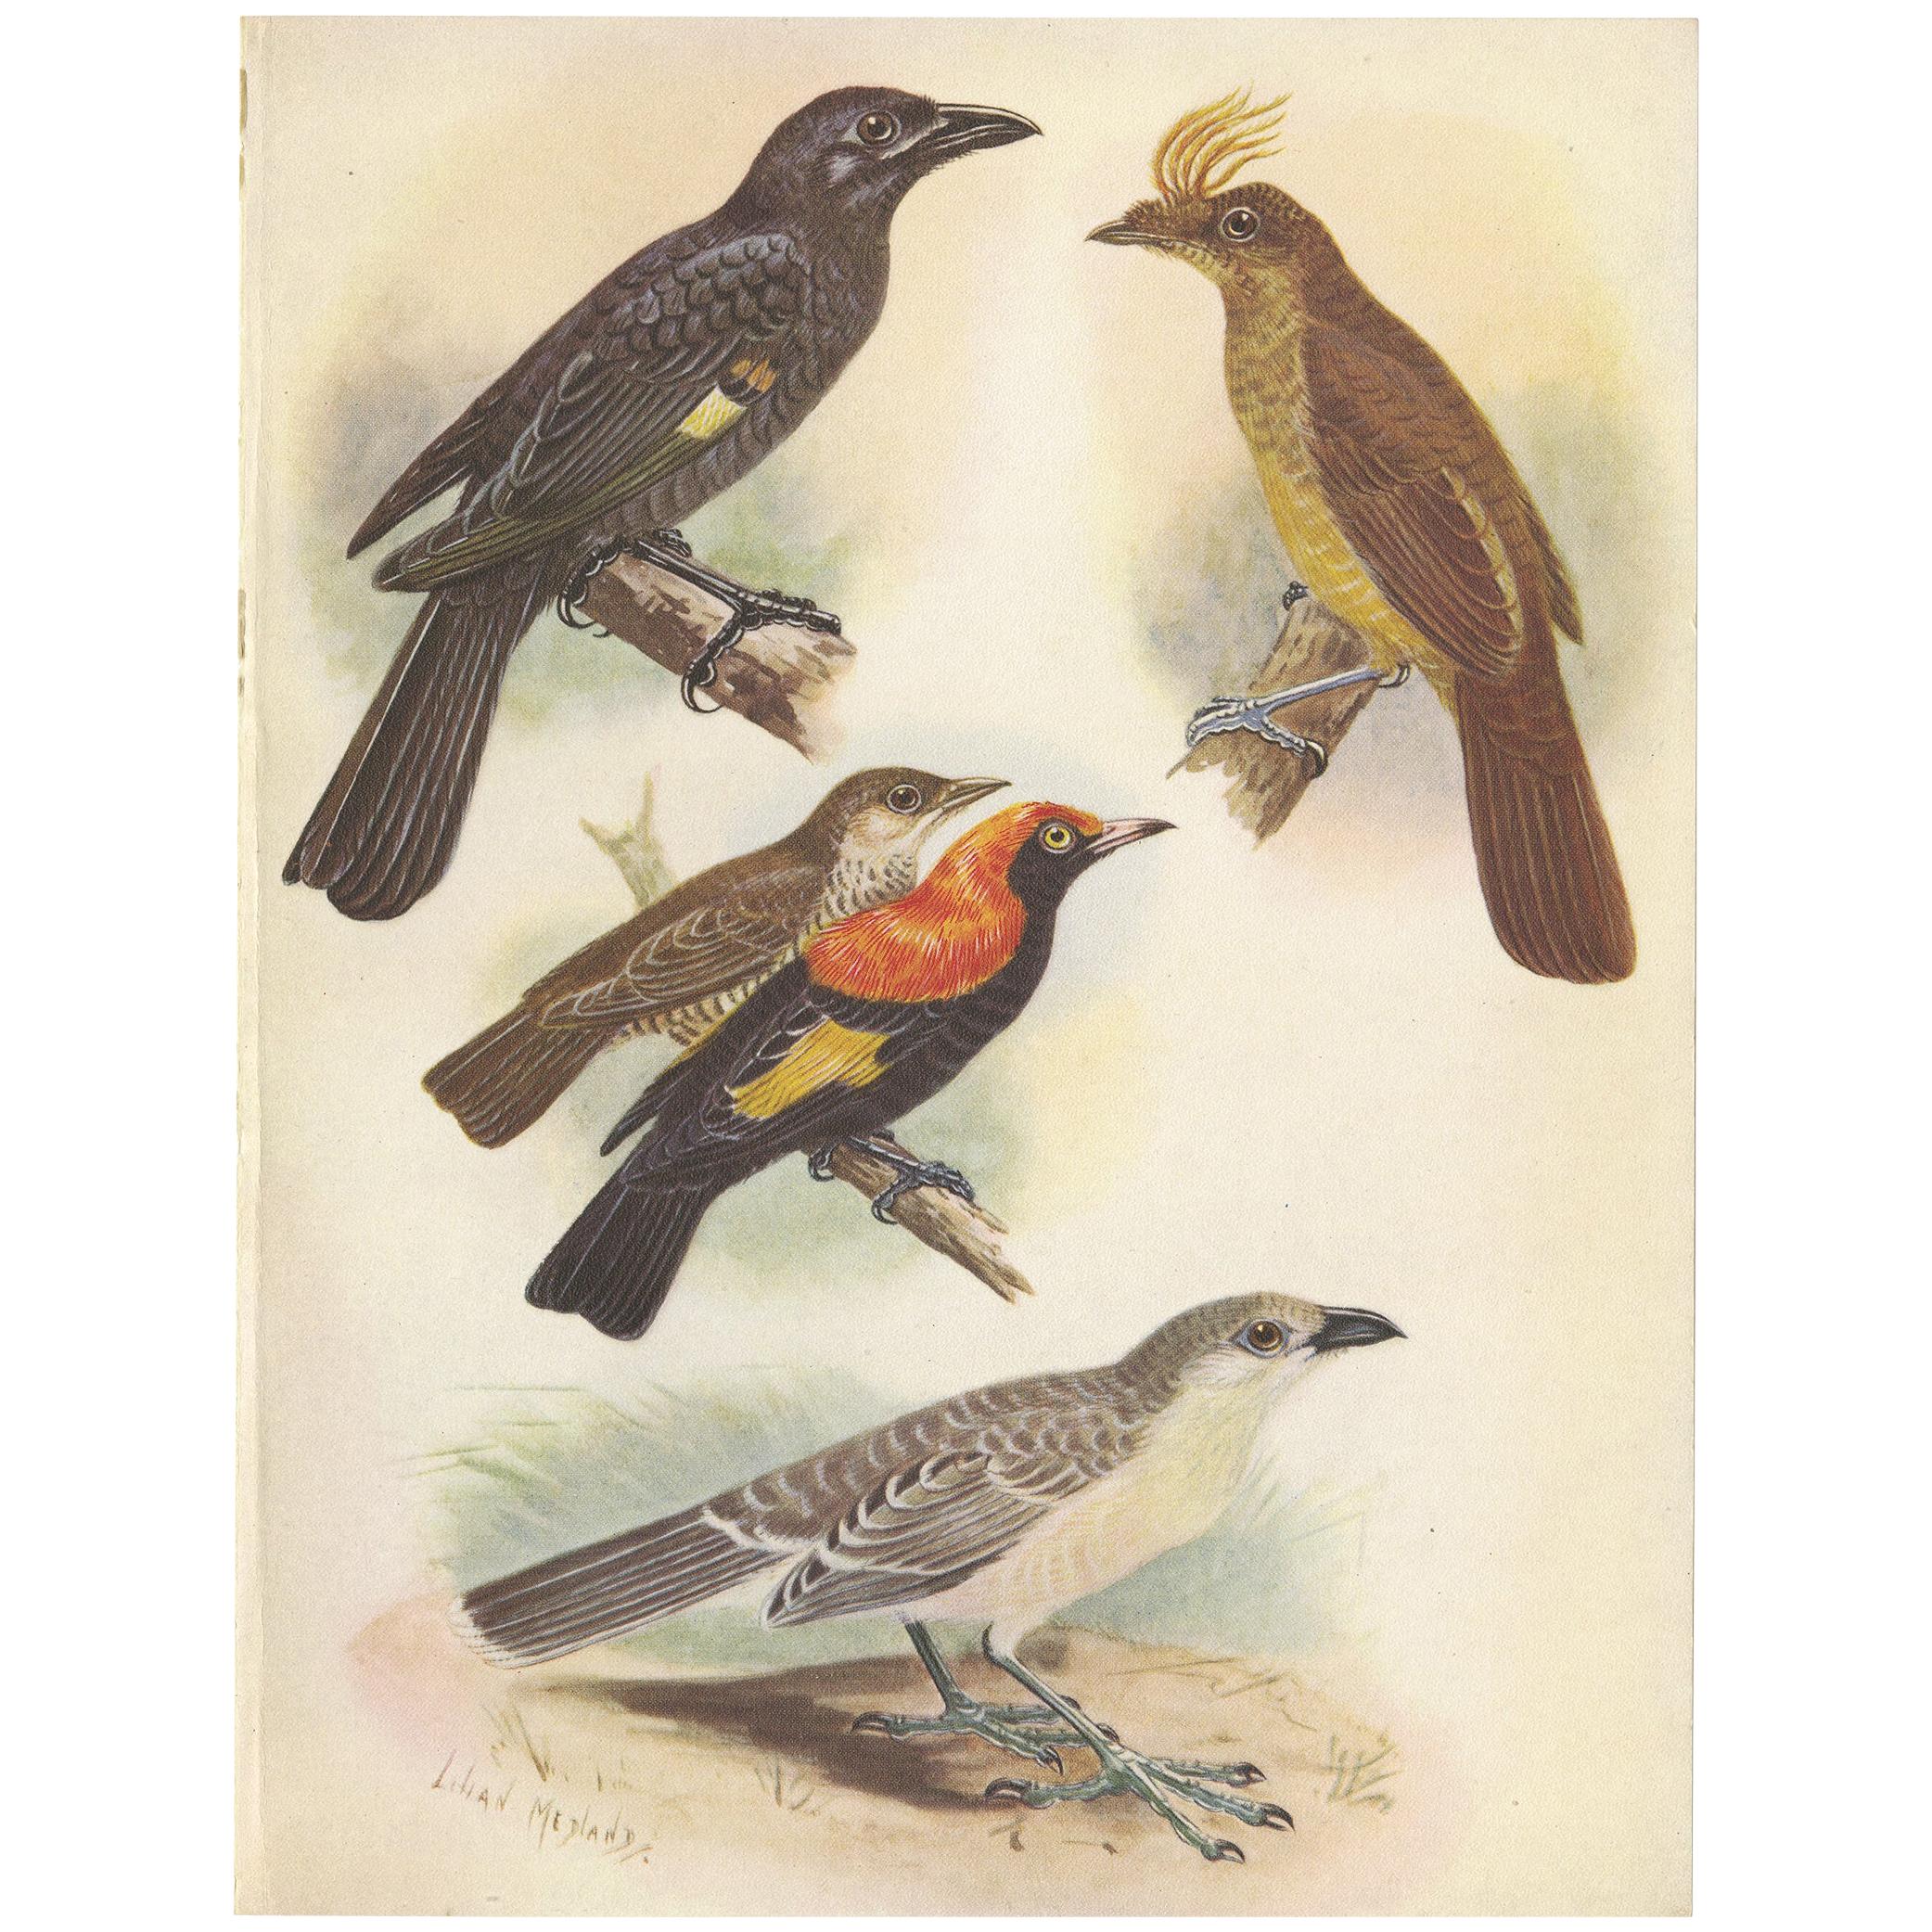 Antique Print of the Archbold's Bower-Bird, Crested Golden Bird and Other, 1950